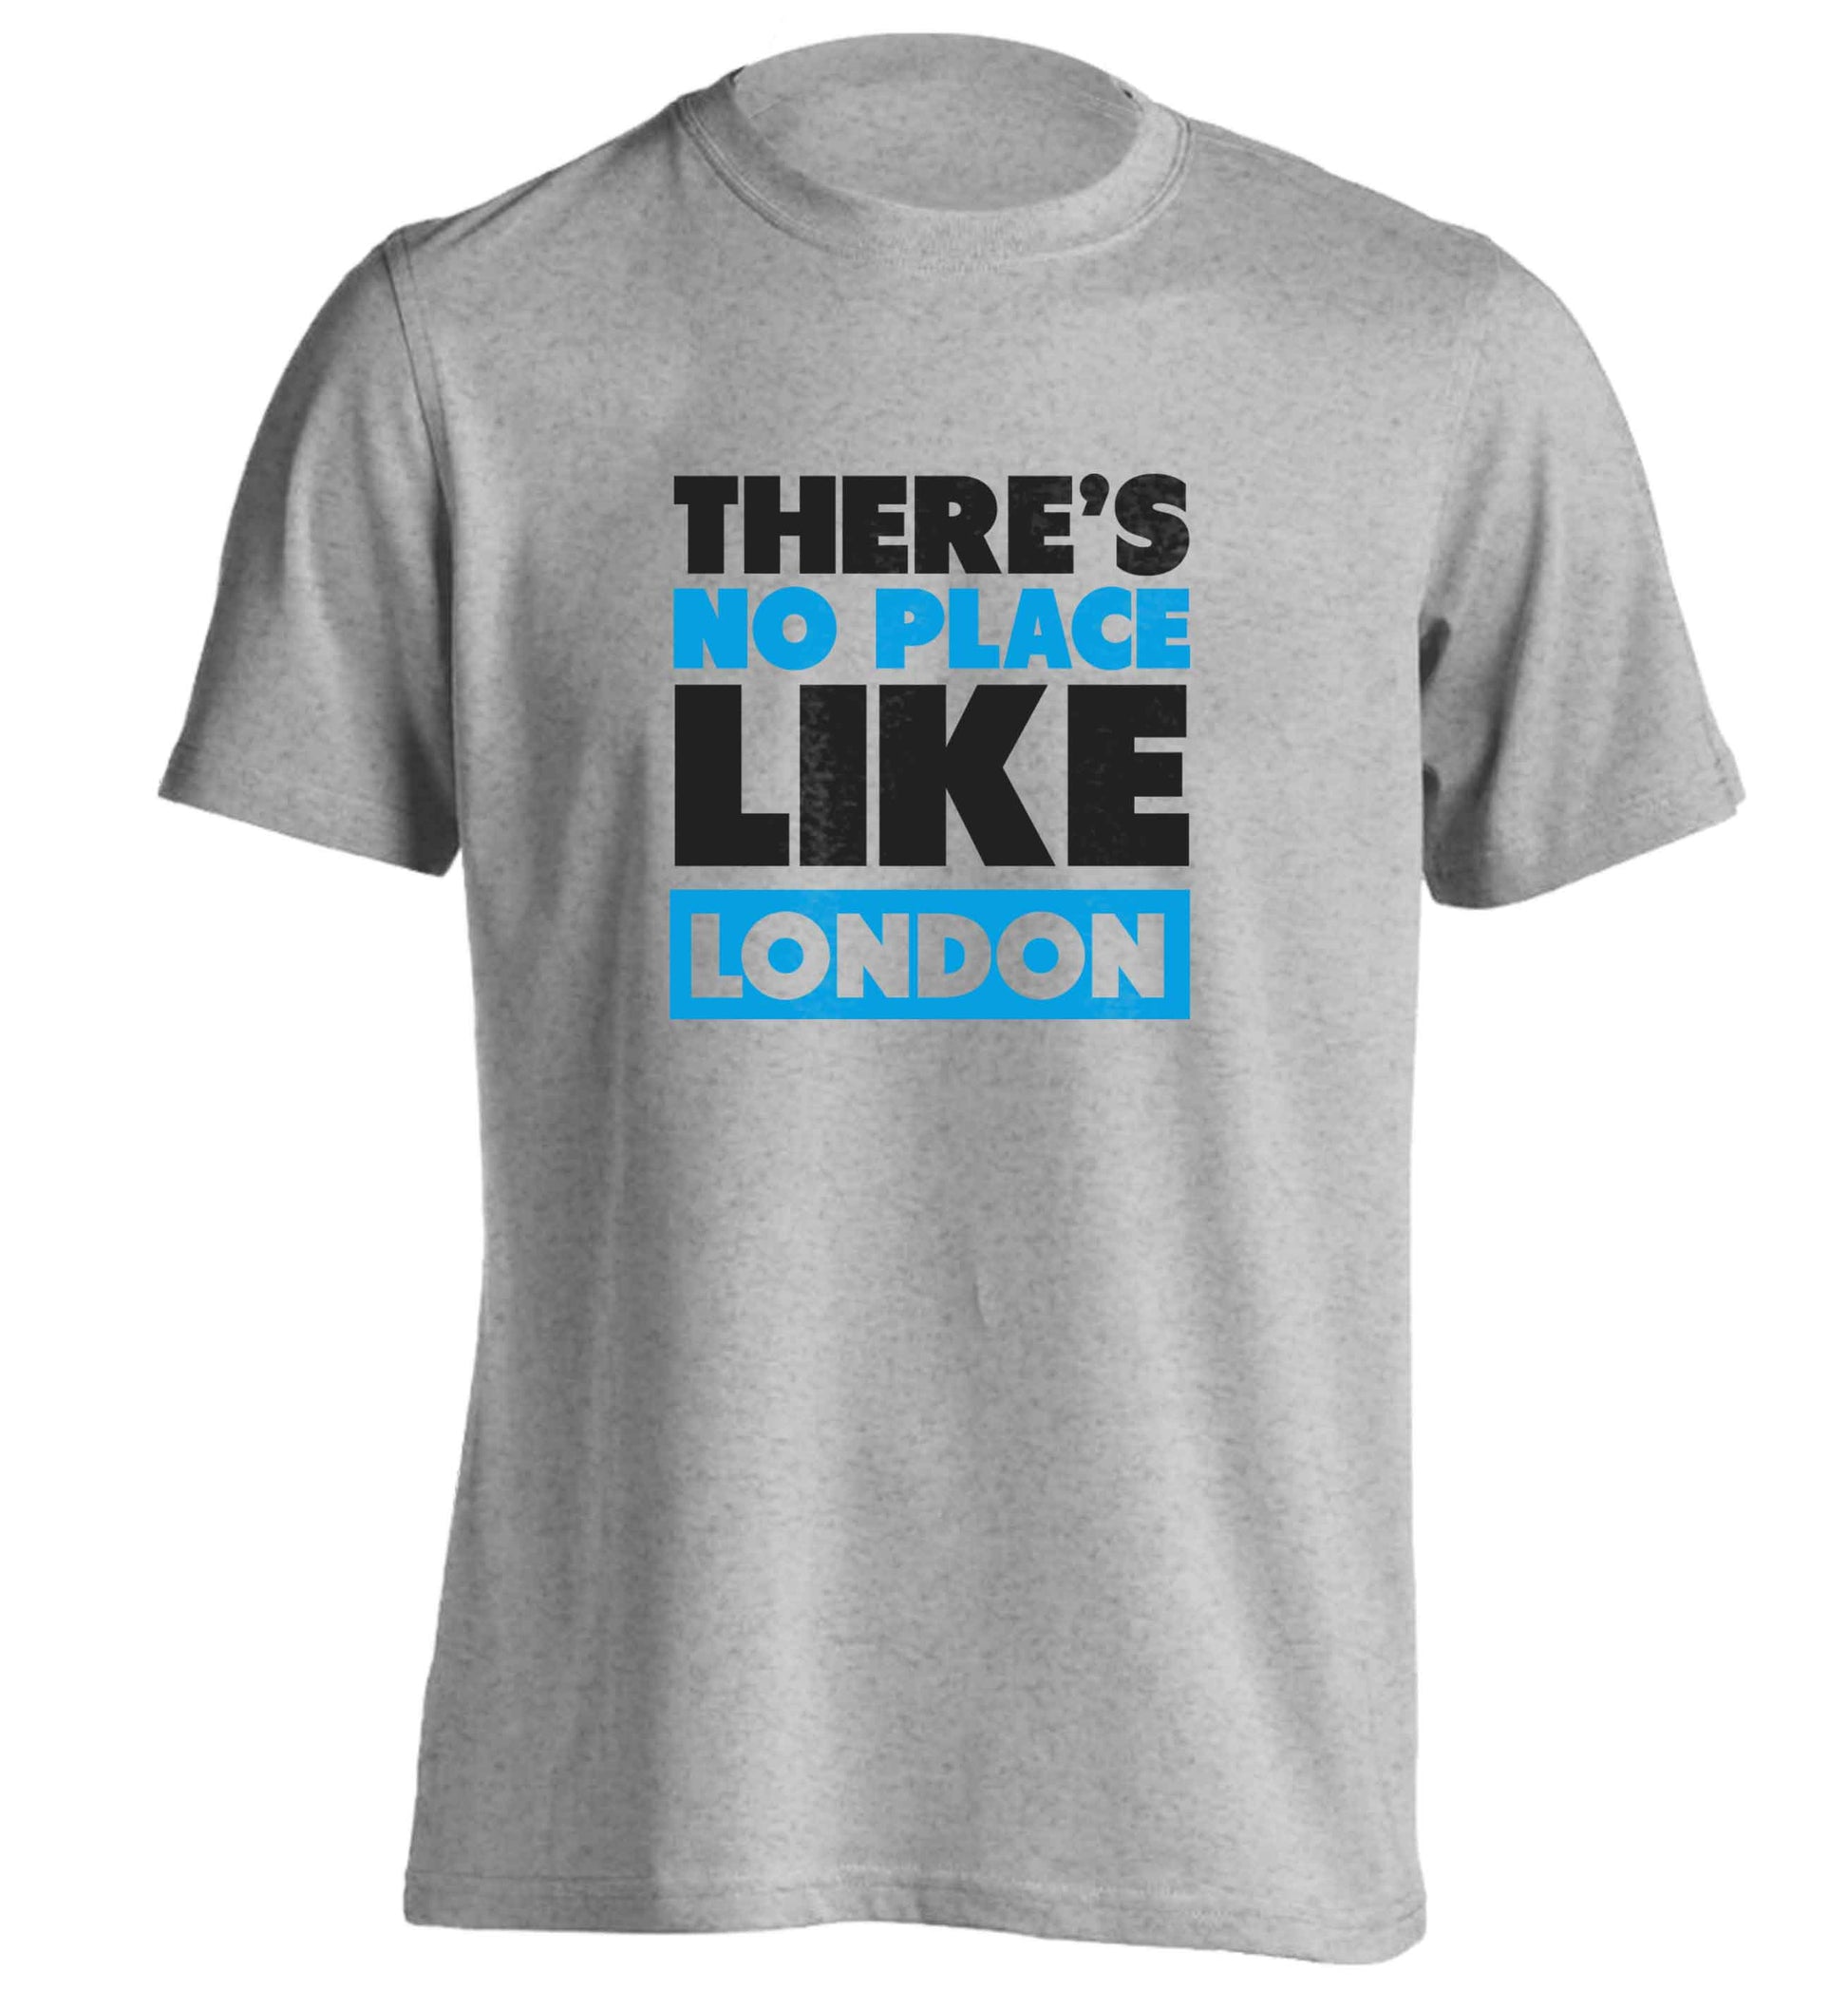 There's no place like England adults unisex grey Tshirt 2XL